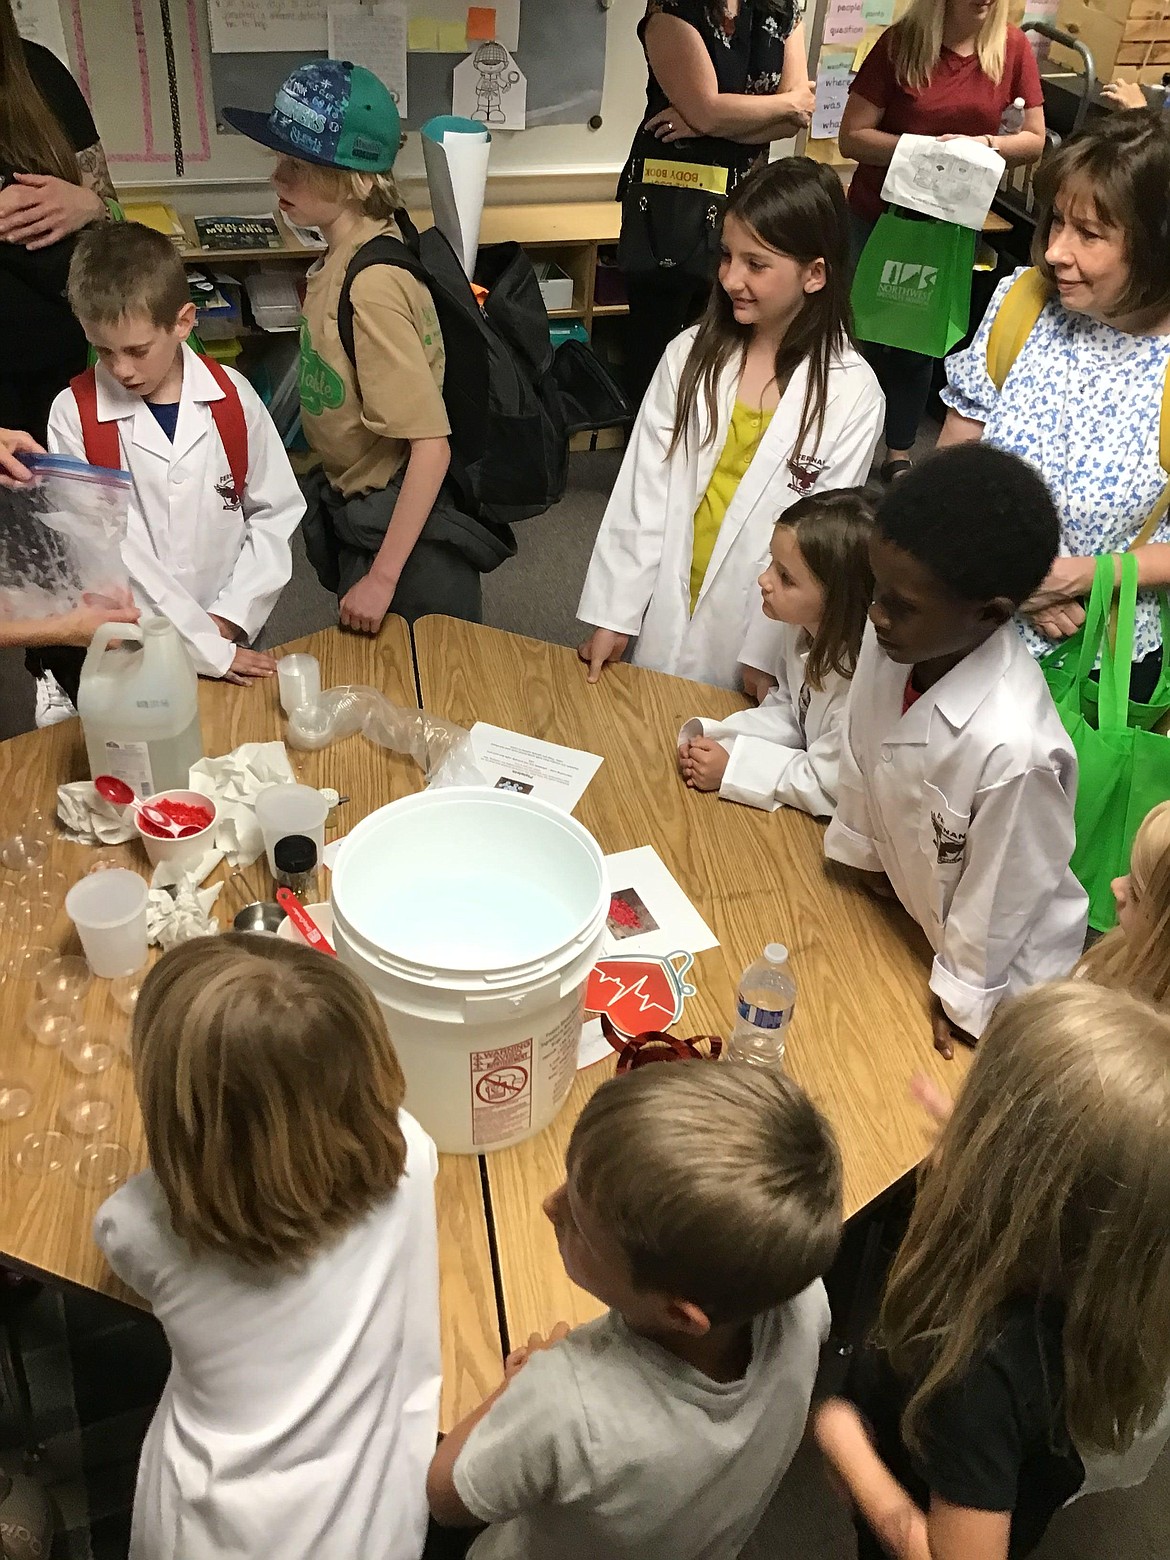 Fernan STEM Academy welcomed over 400 visitors May 18 during its Health and Safety STEM night. Students were given Fernan lab coats to wear as they explored a variety of topics relating to health and safety, including CPR, first aid, phlebotomy and dental health.